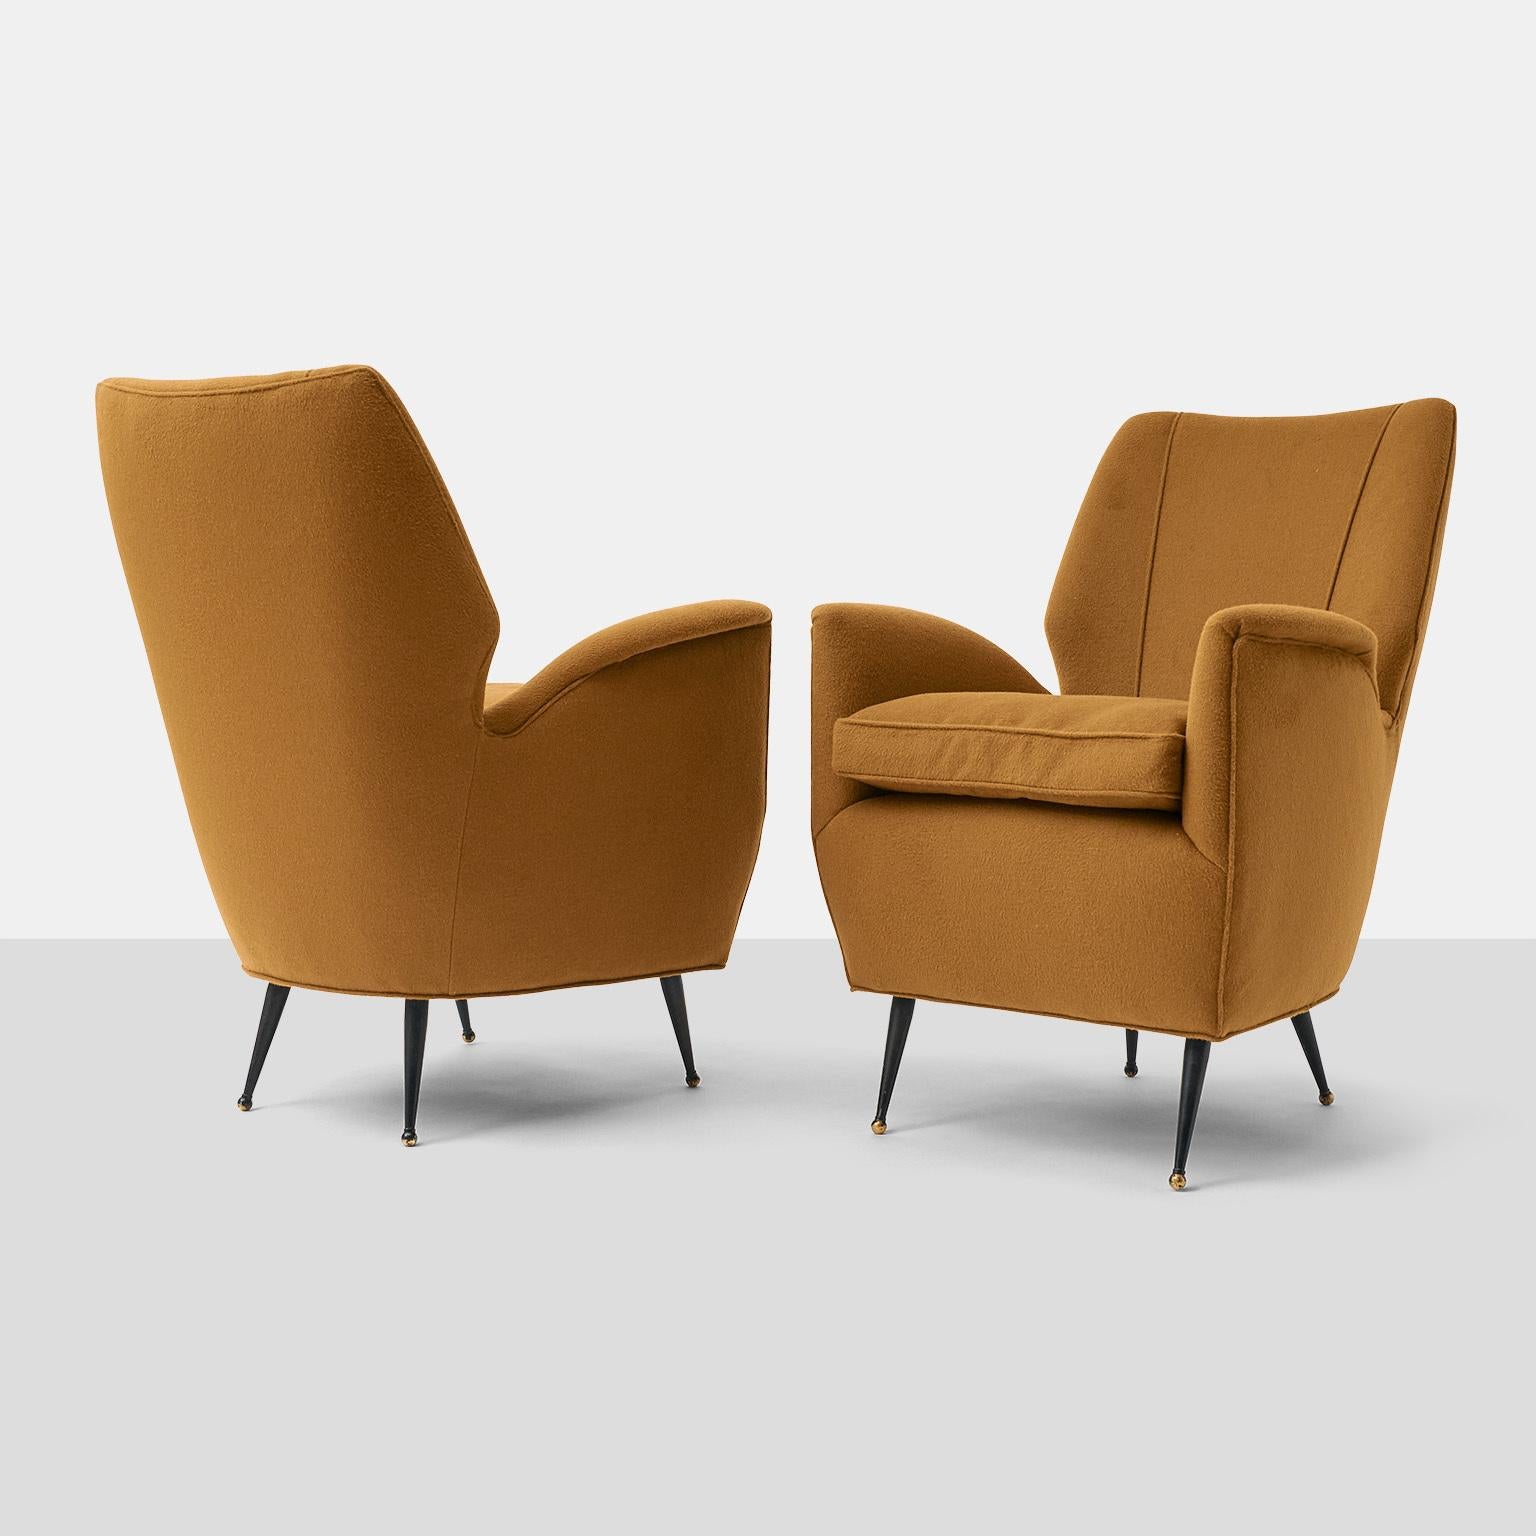 A rare pair of Gio Ponti attributed lounge chairs with brass supports and down filled seat cushions. Lovingly restored, and covered in a luxurious Sandra Jordan Prima Alpaca fabric. Priced individually. 

Measures: 18